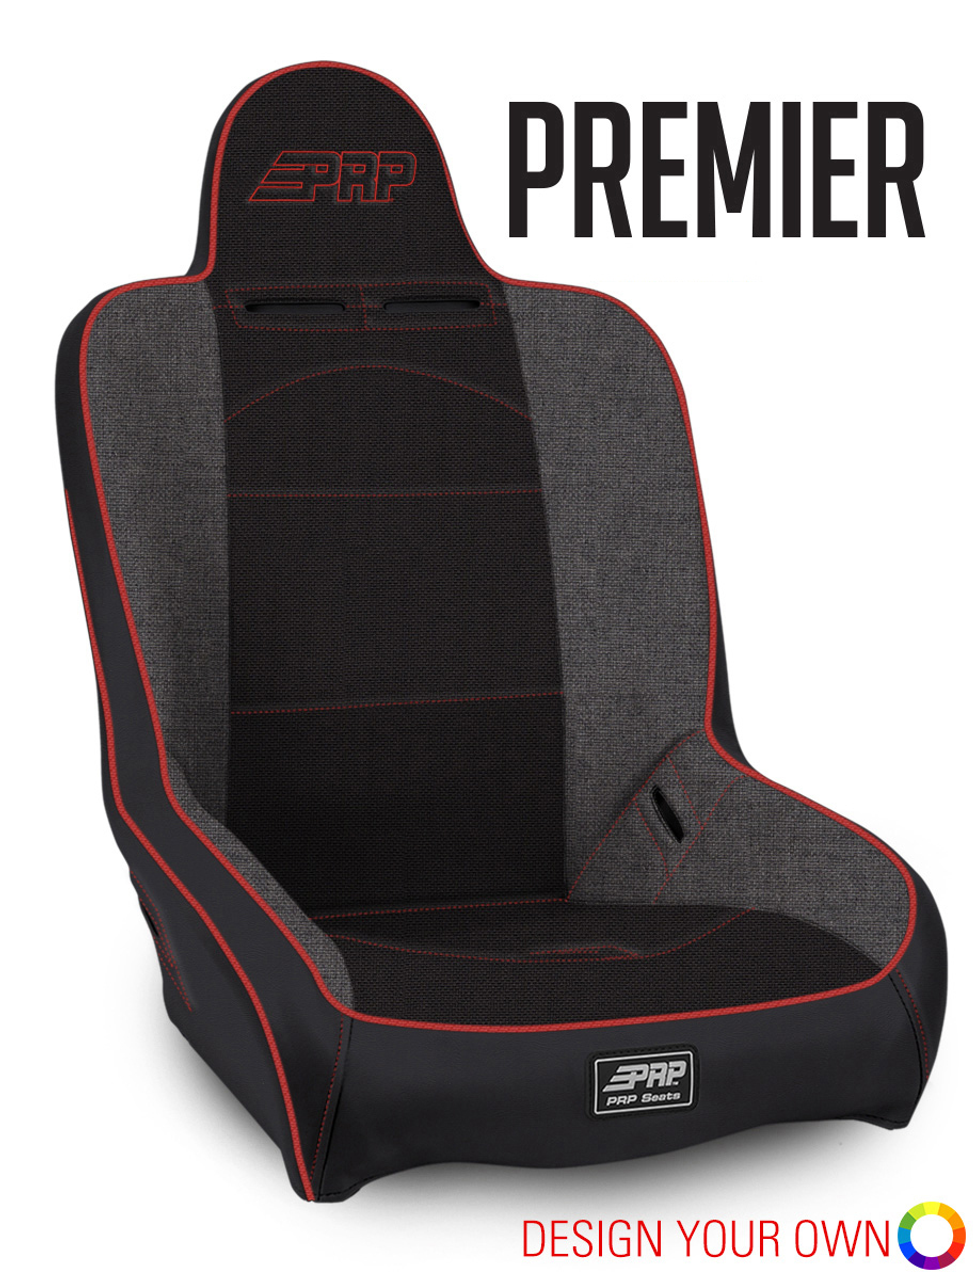 Premier High Back, Extra Wide and 4" XT Suspension Seat